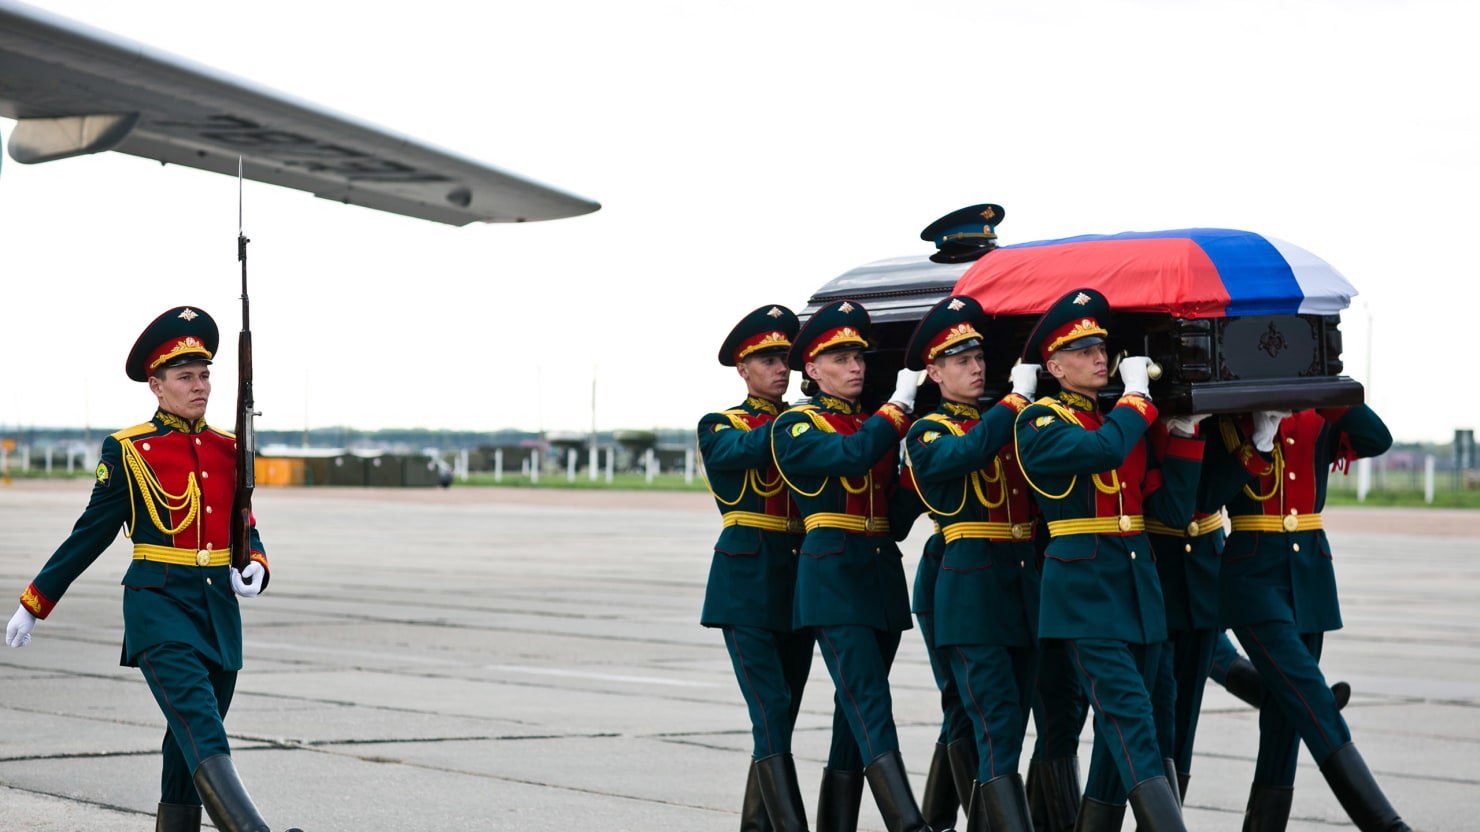 Casket of a Russian soldier is carried from a plane